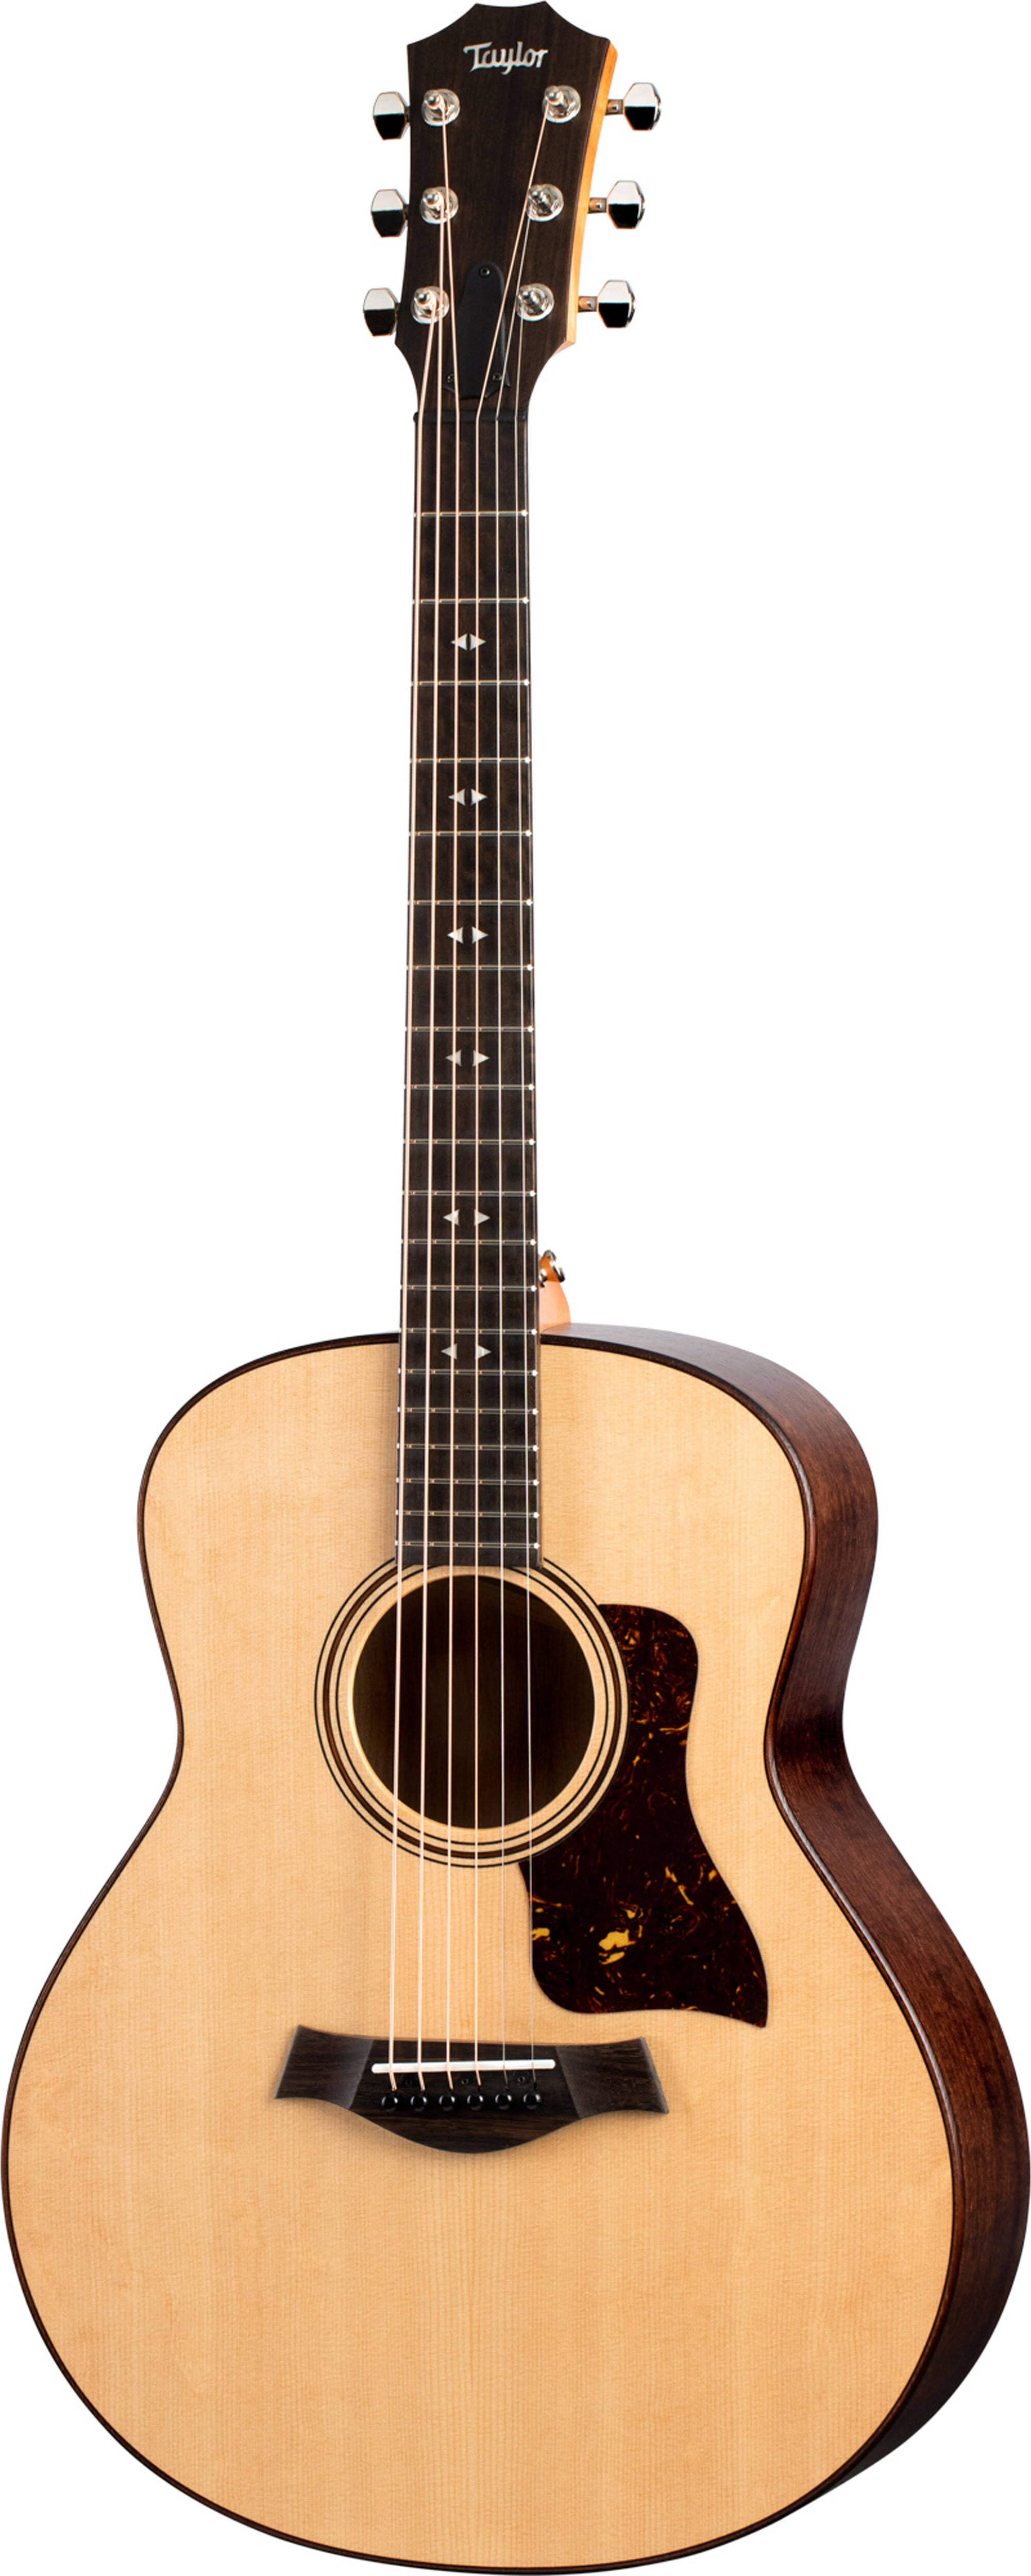 Taylor GTE Grand Theater Urban Ash Acoustic-Electric